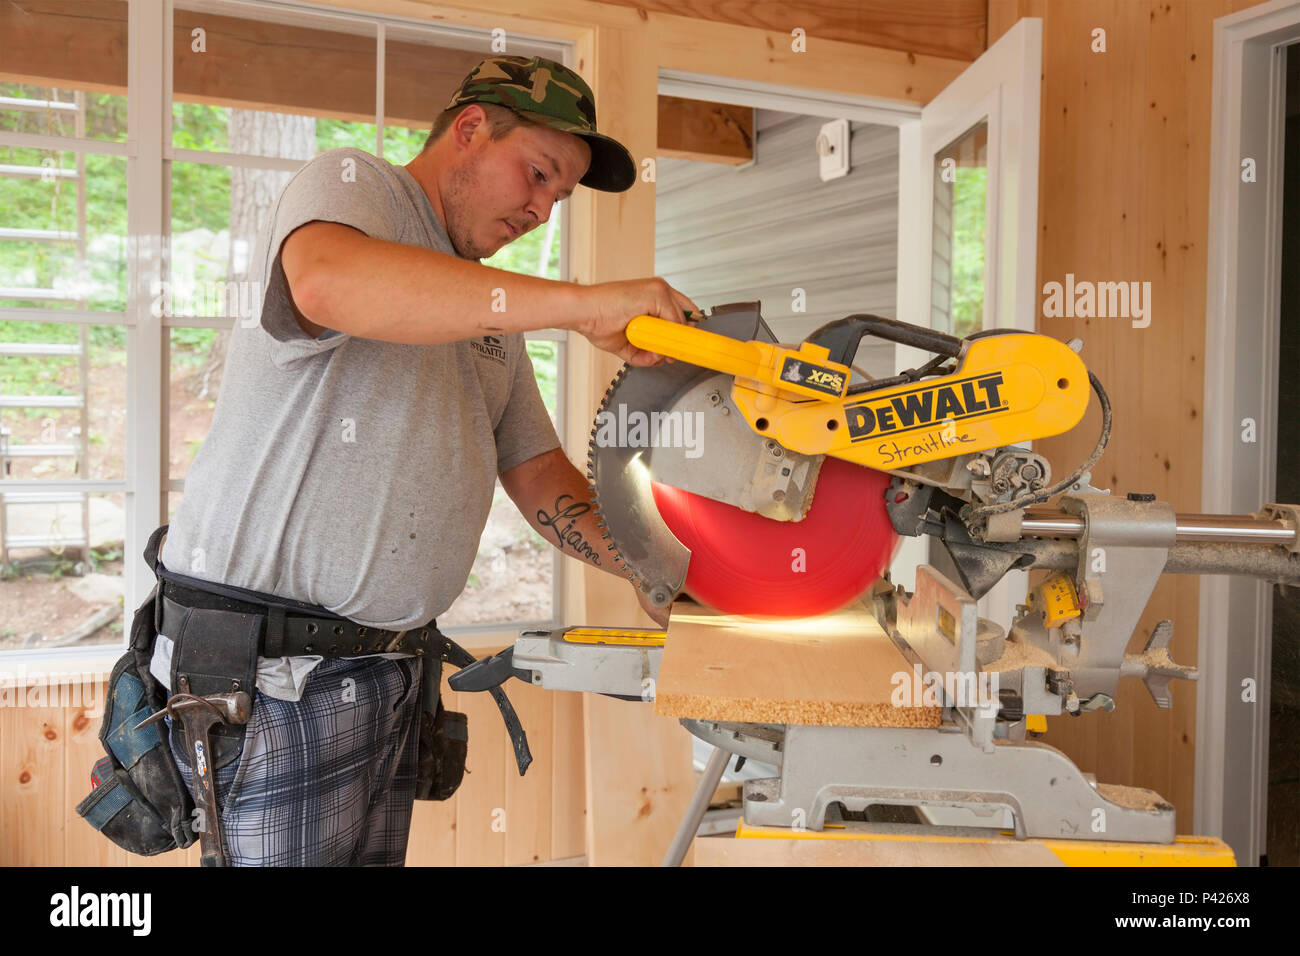 A construction worker using a circular saw to cut a wooden plank in Ontario, Canada. Stock Photo